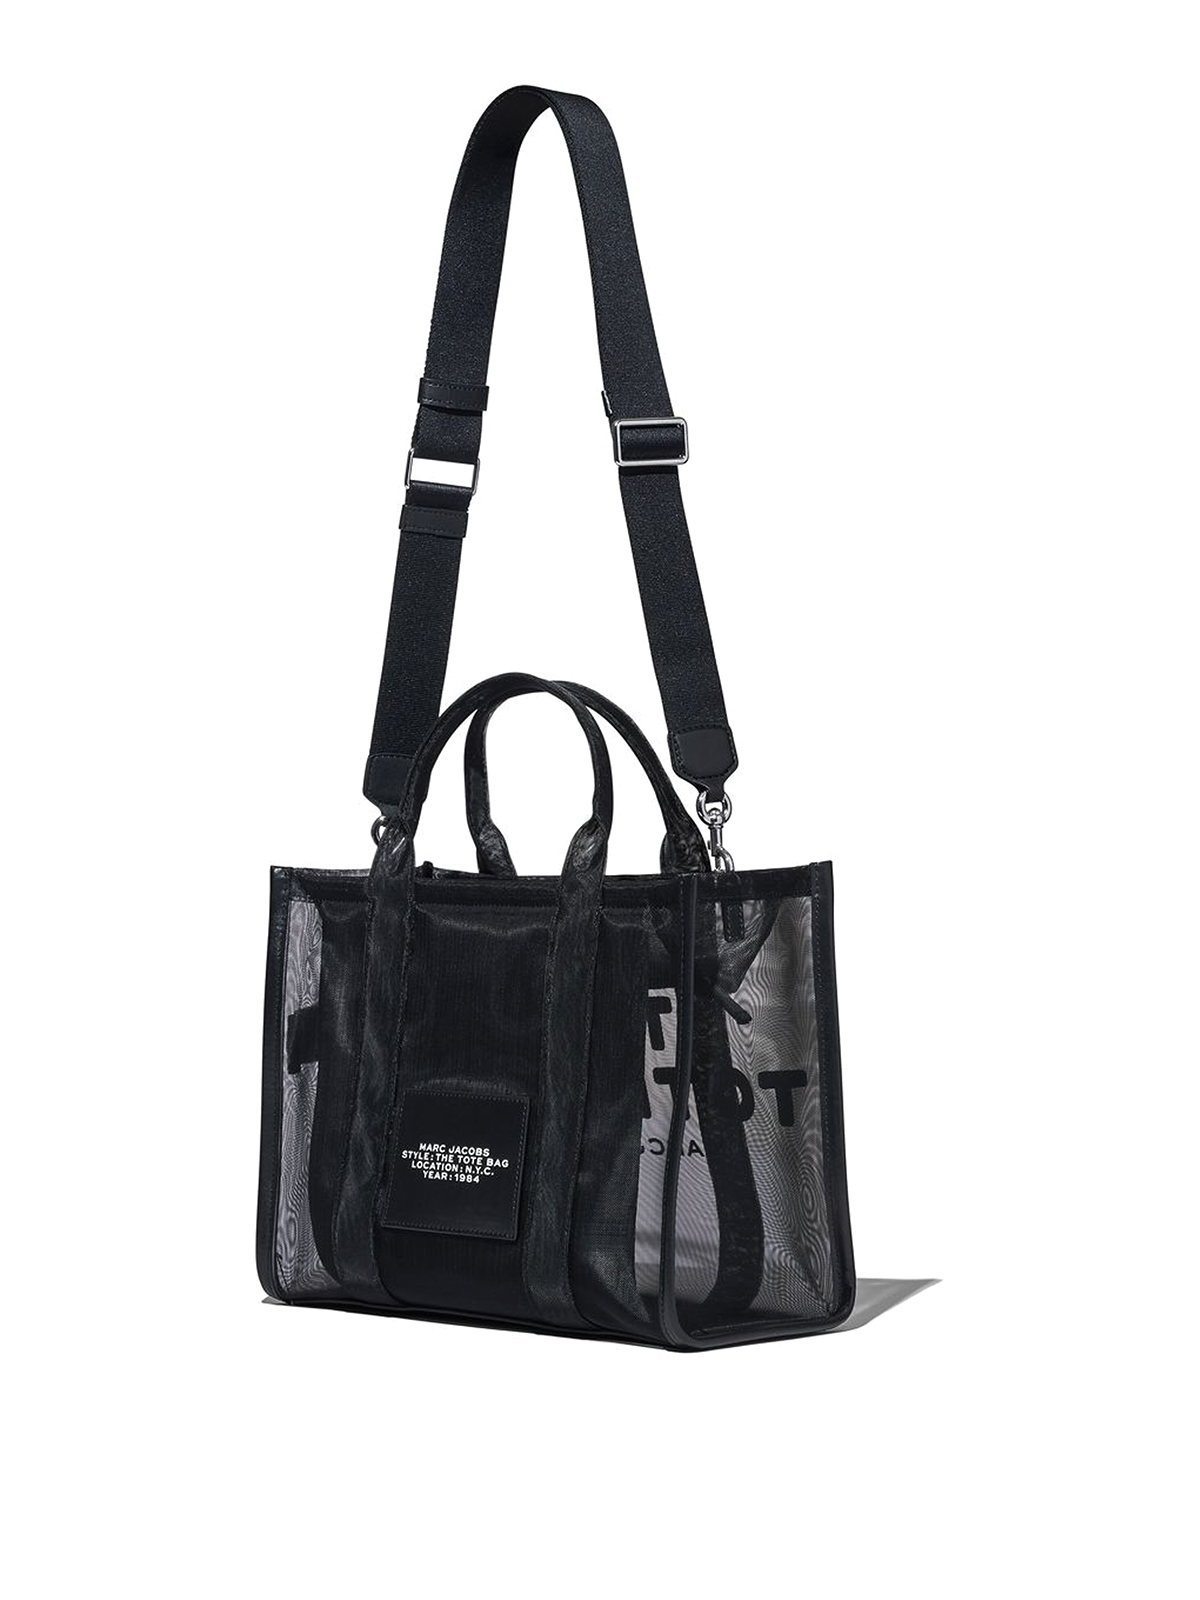 Totes bags Marc Jacobs - Sheer effect medium bag with logo